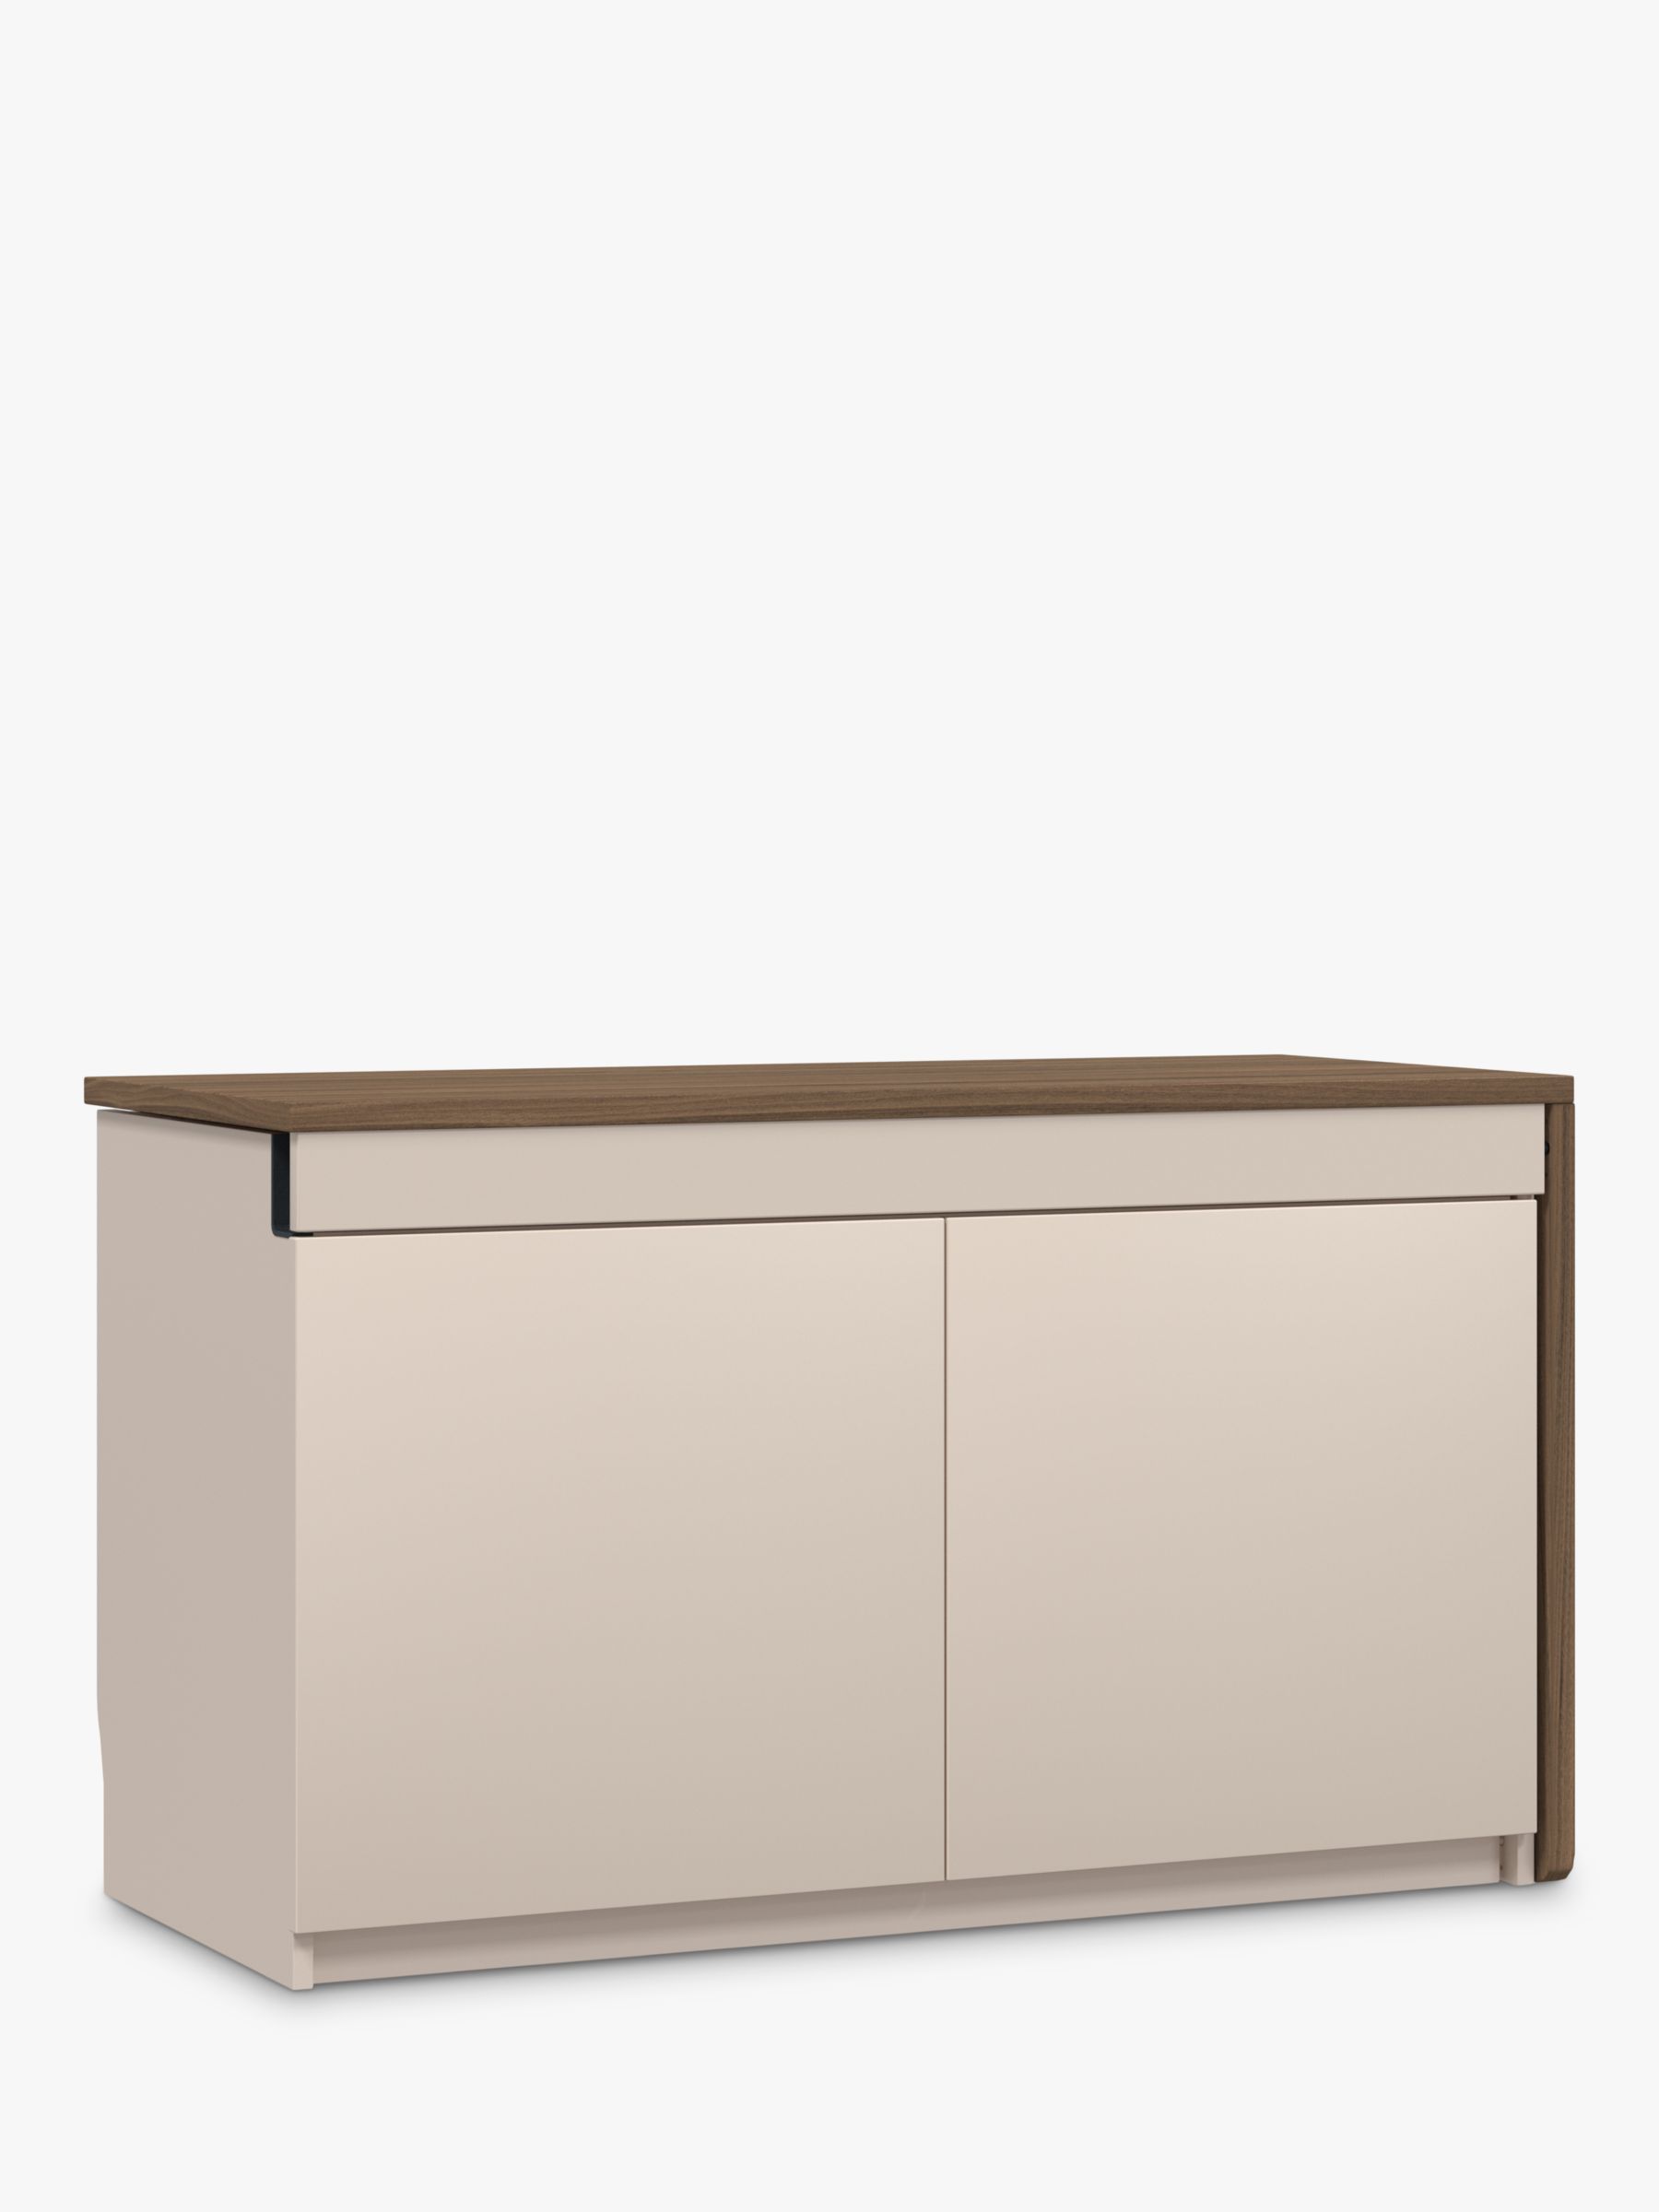 Photo of Bisley hideaway swing sideboard with right hand desk